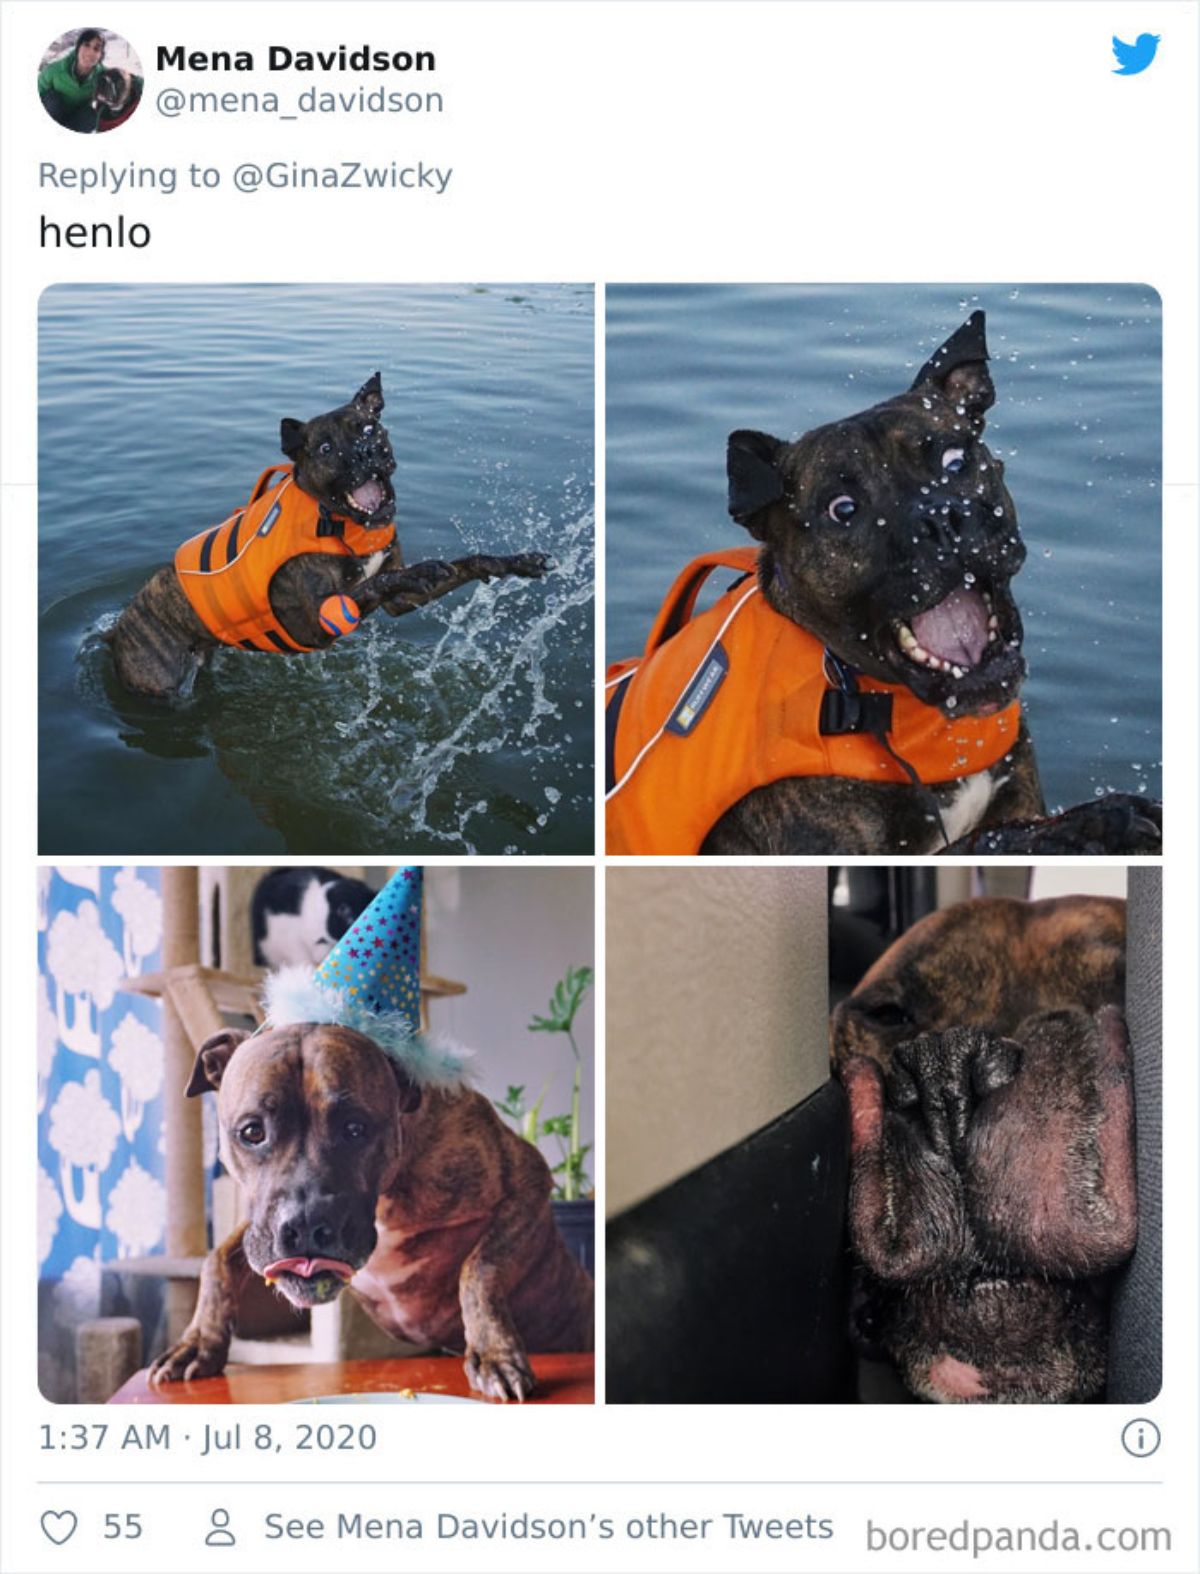 tweet of a set of 4 photos with 2 photos of a black dog in water wearing an orange life vest and 2 photos of a brown dog